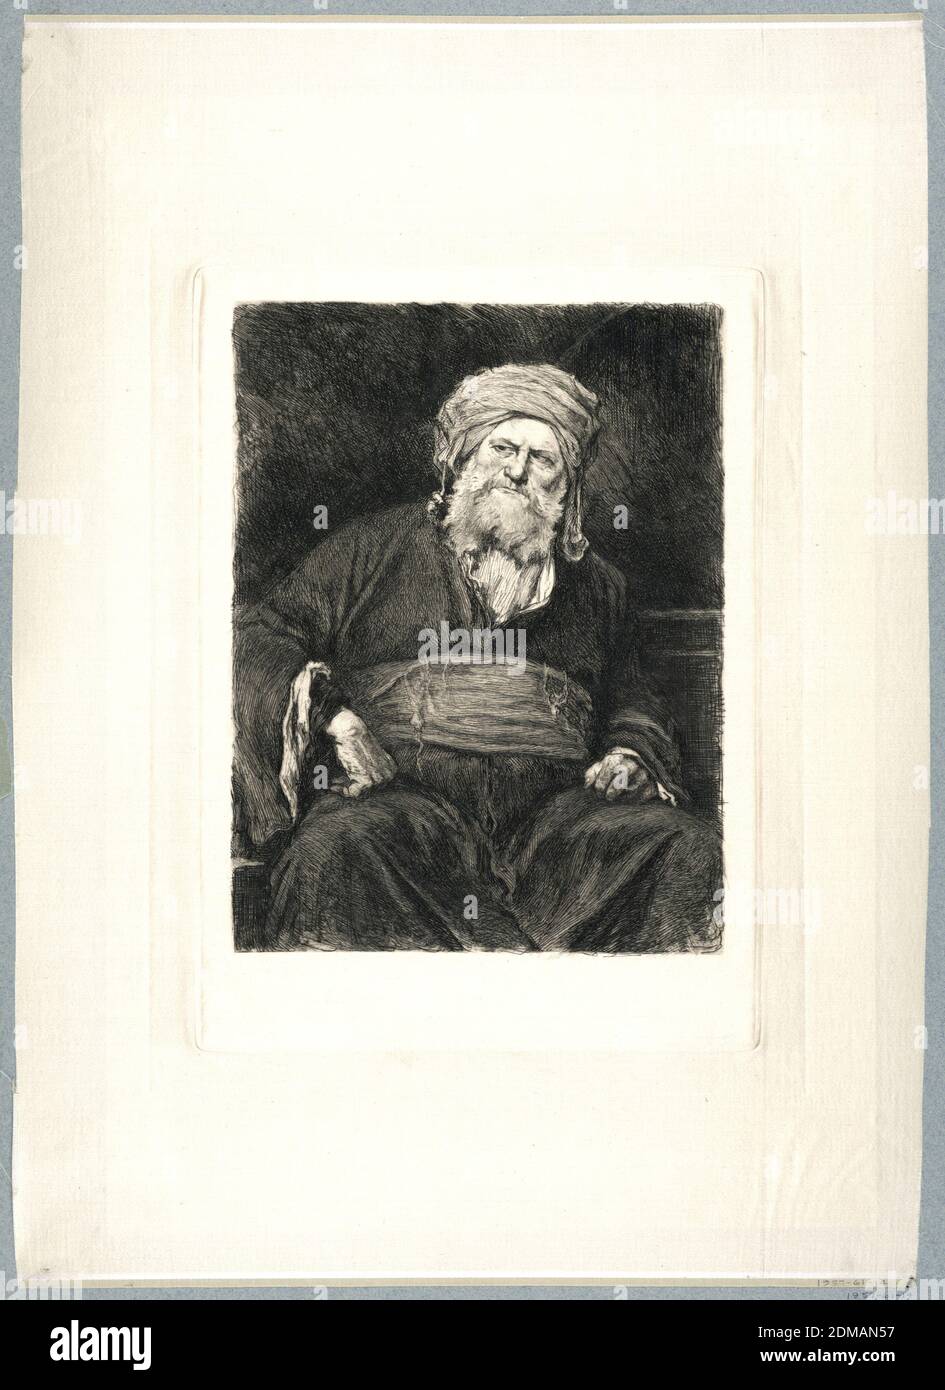 Pharisian, William Unger, German, 1837 - 1932, Michael Munkacey, 1844 - 1909, Etching in dark brown ink on white satin, Knee length portrait of a large man seated frontally, wearing robes and a turban. His glance is directed to the left, his right hand leans on his right thigh., Germany, ca. 1880, Print Stock Photo